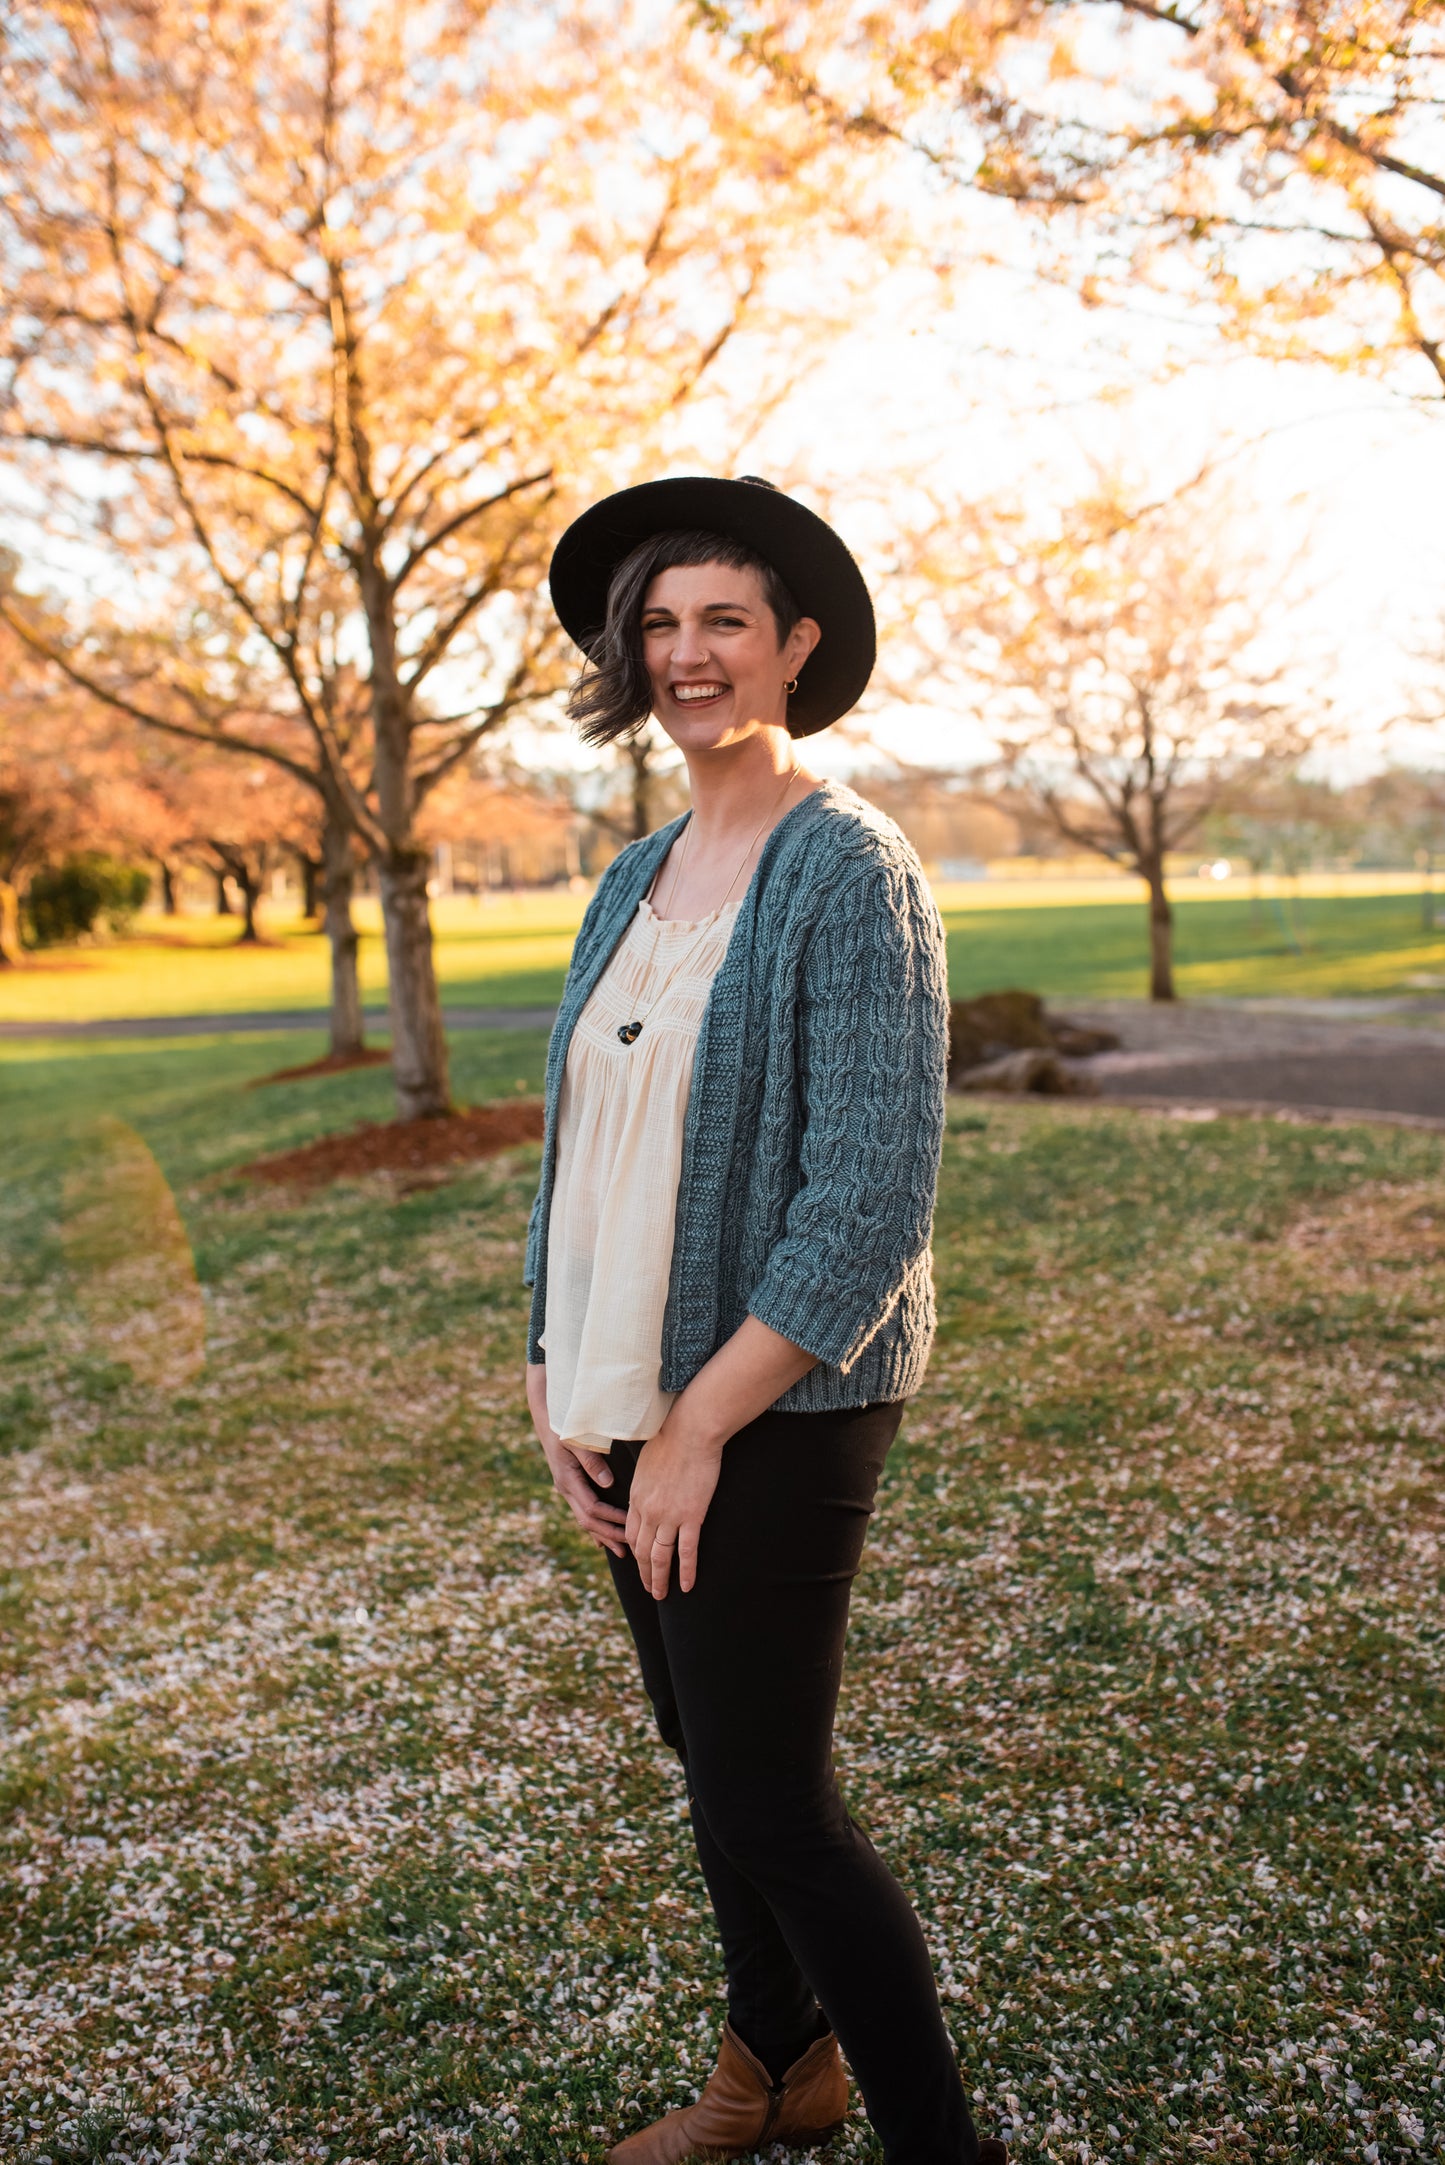 Standing in a park at a three quarter angle, Jen smiles at the camera. She wears a black hat and pants with a white tank top under a light blue cardigan. The cardigan is knit with three quarter length sleeves and horseshoe cable details.